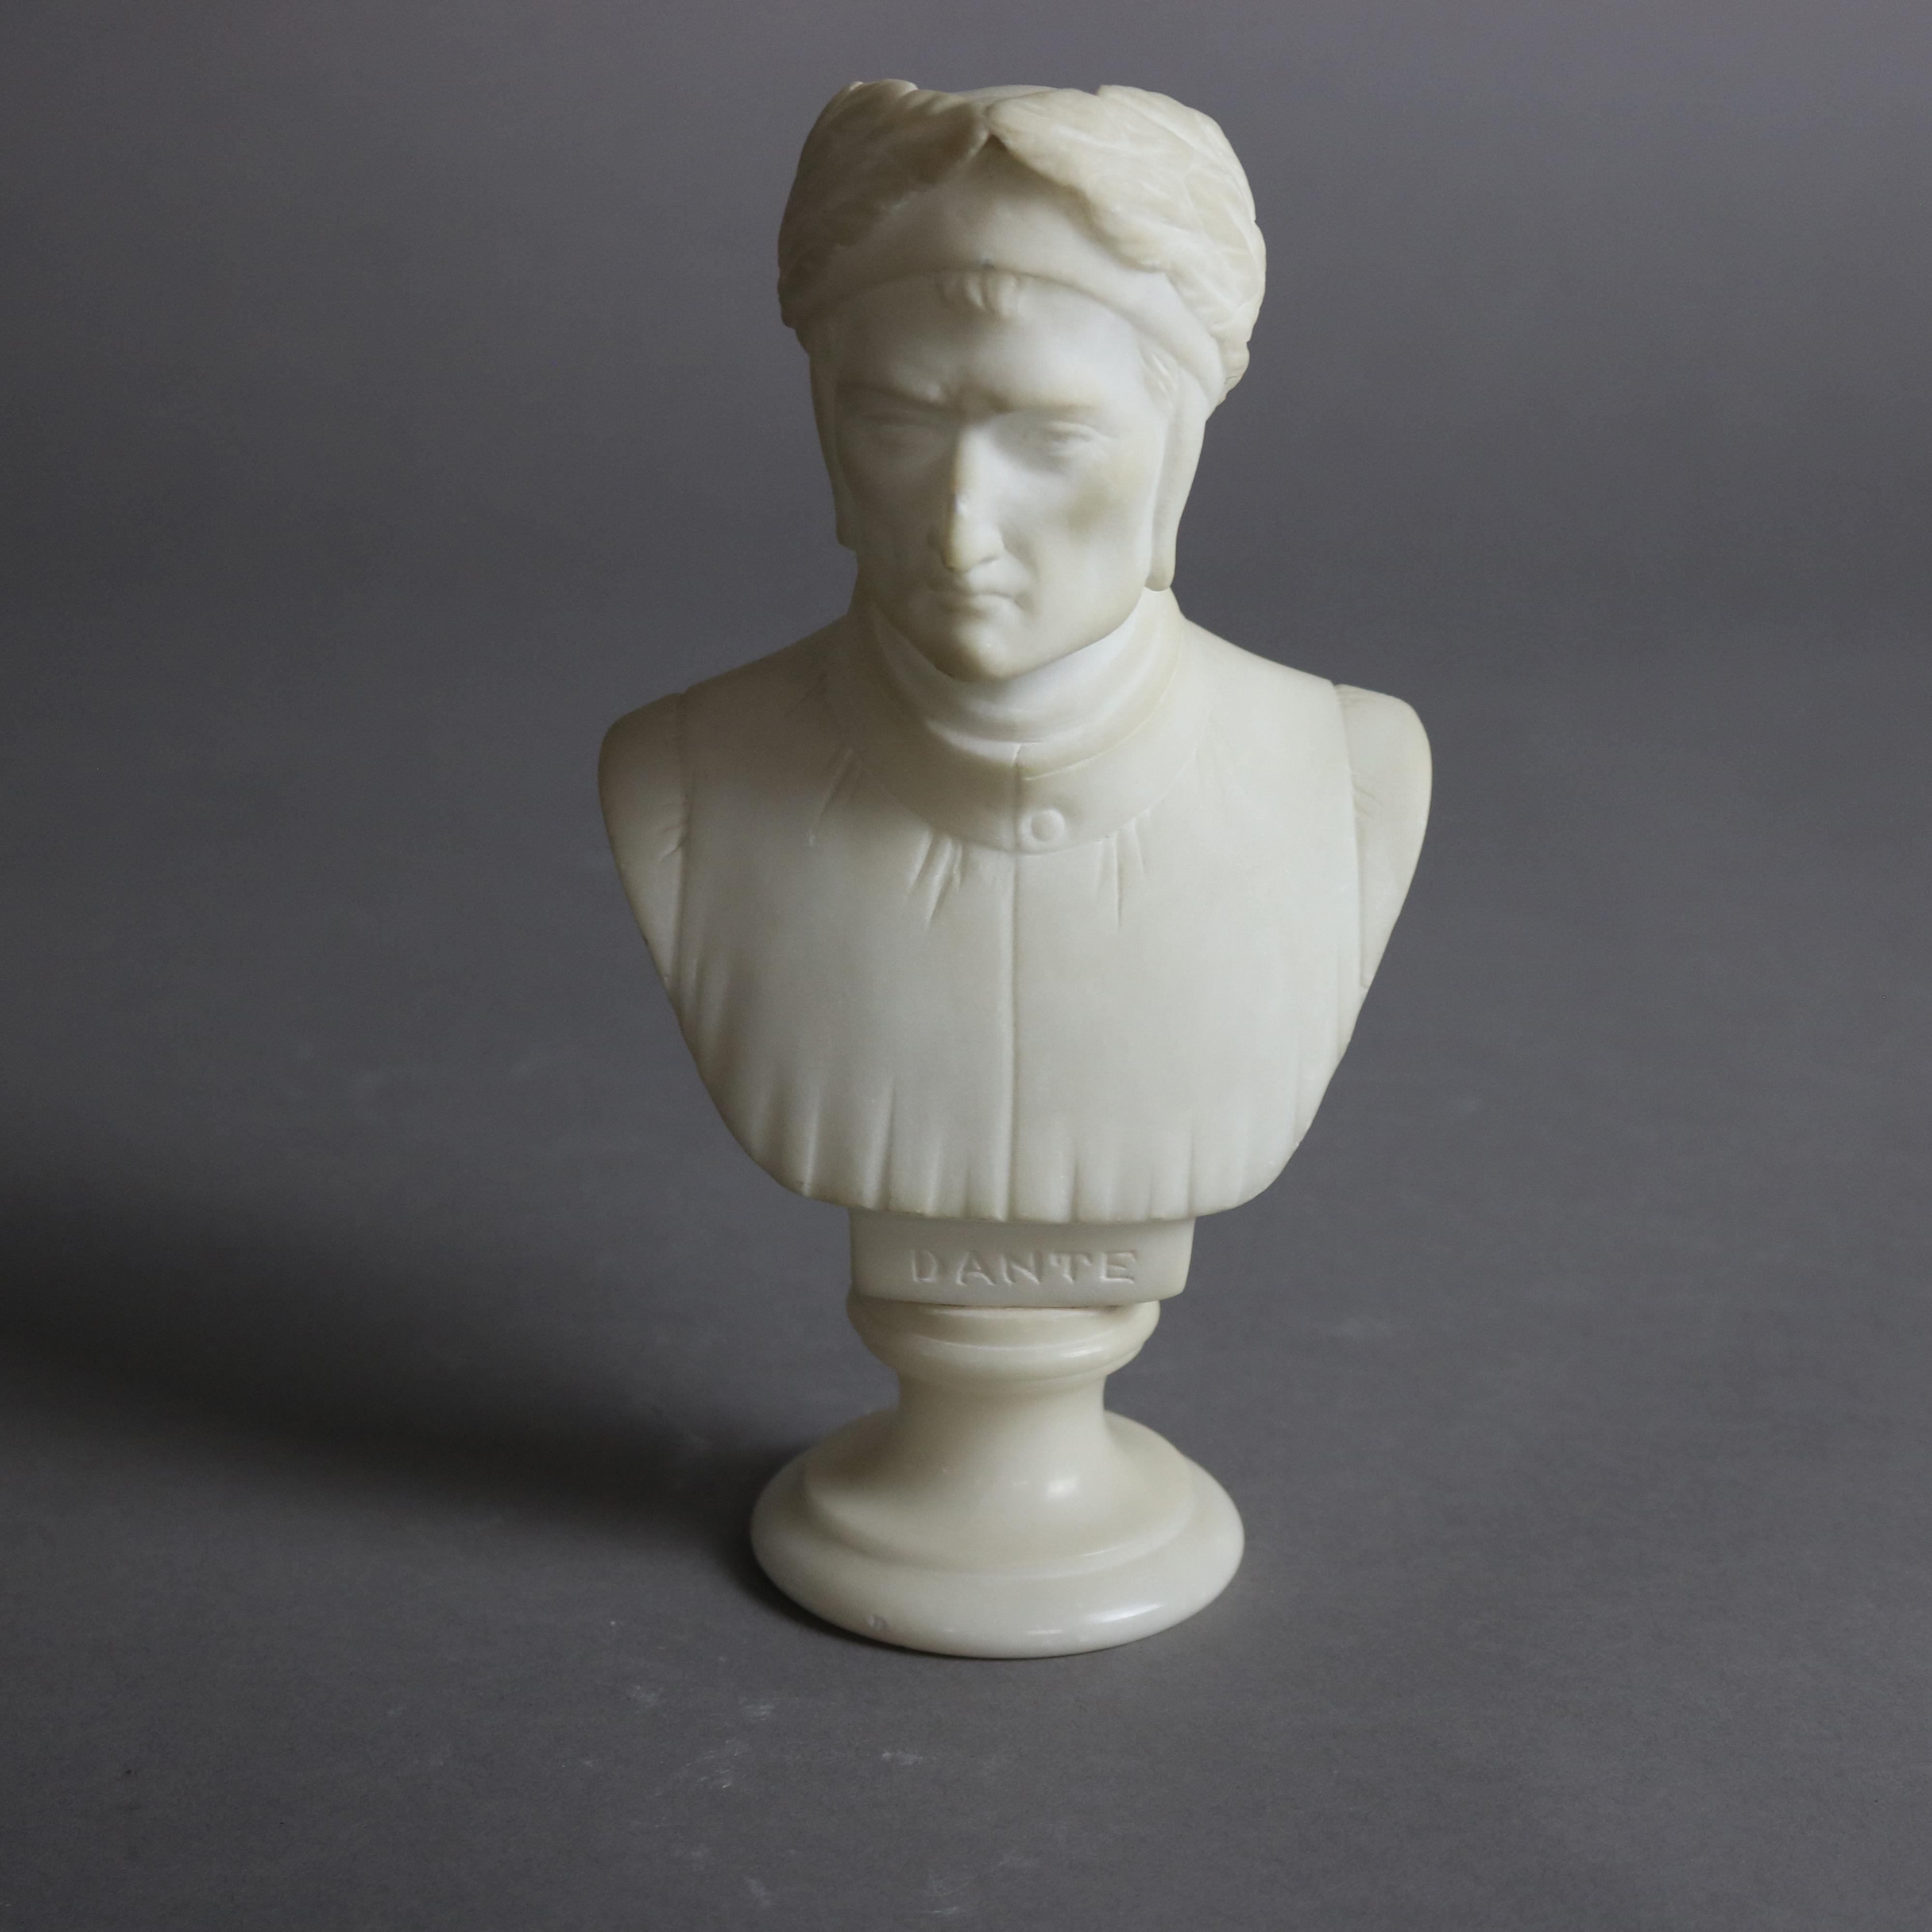 An antique Italian sculpture offers carved marble depicting a portrait bust of Dante Alighieri seated on stepped circular plinth, titled as photographed, c1890

Measures - 8.25''H x 4.5''W x 3''D.